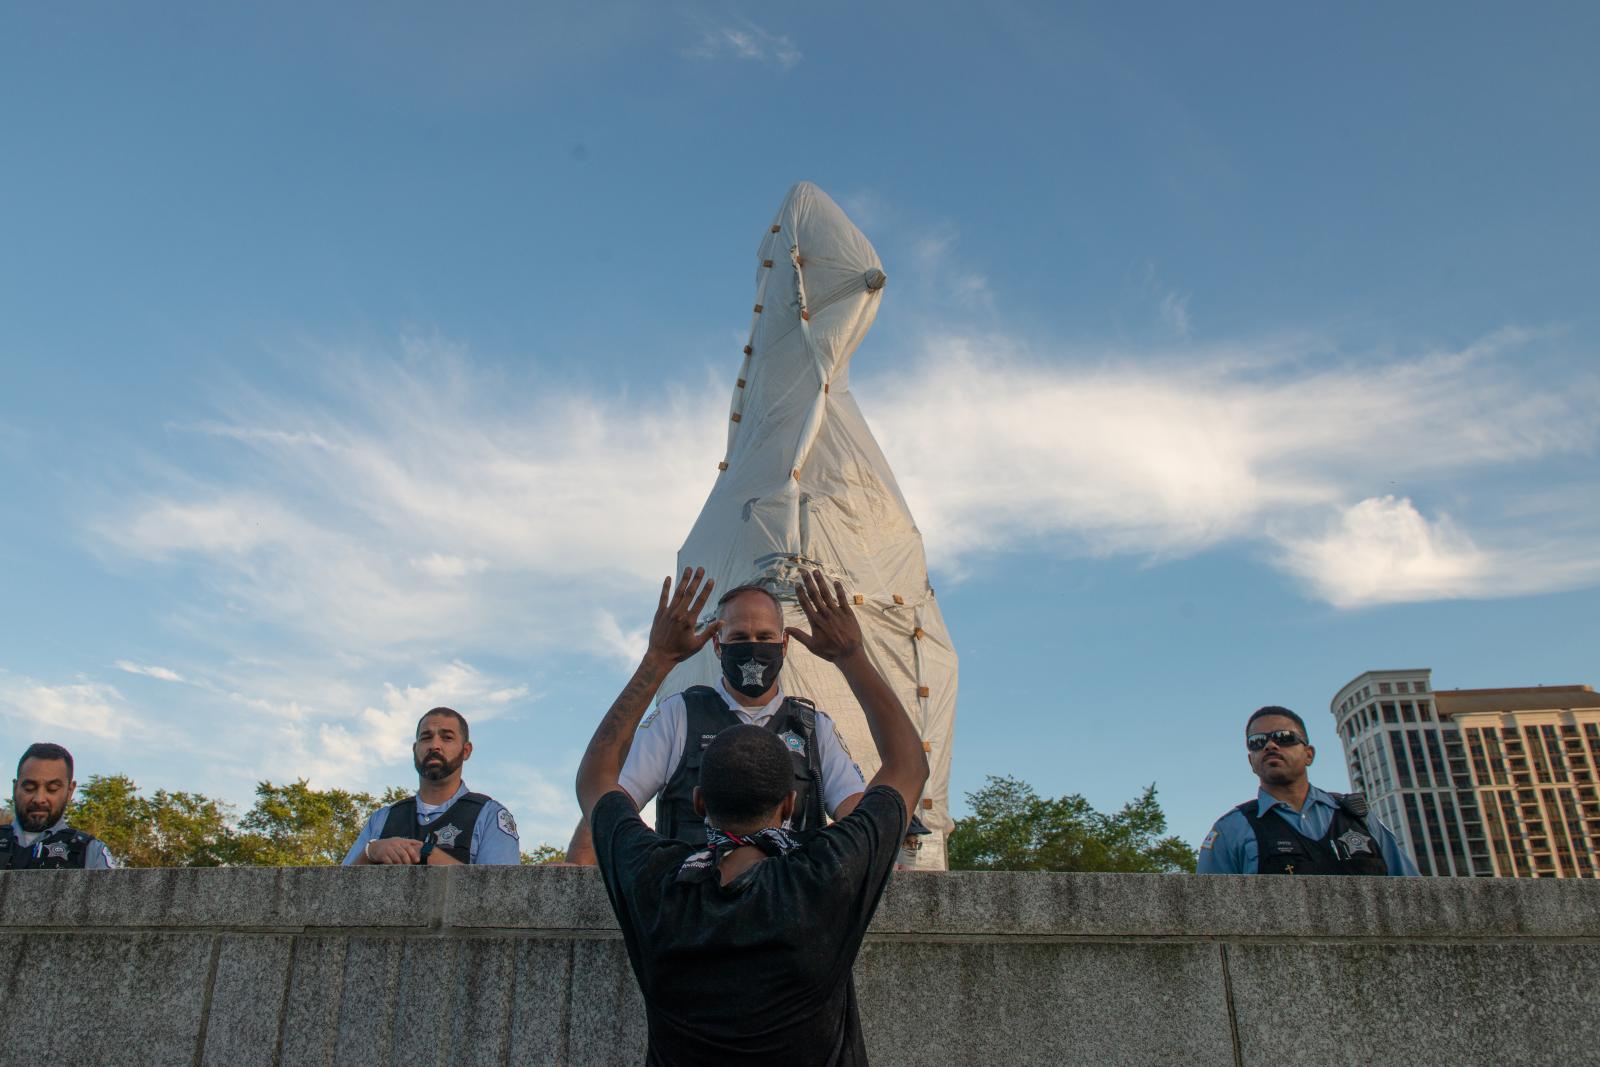 The Storming of the Columbus Statue  - A protestor confronts the Police protecting the Columbus Statue, Raising his hands in a...